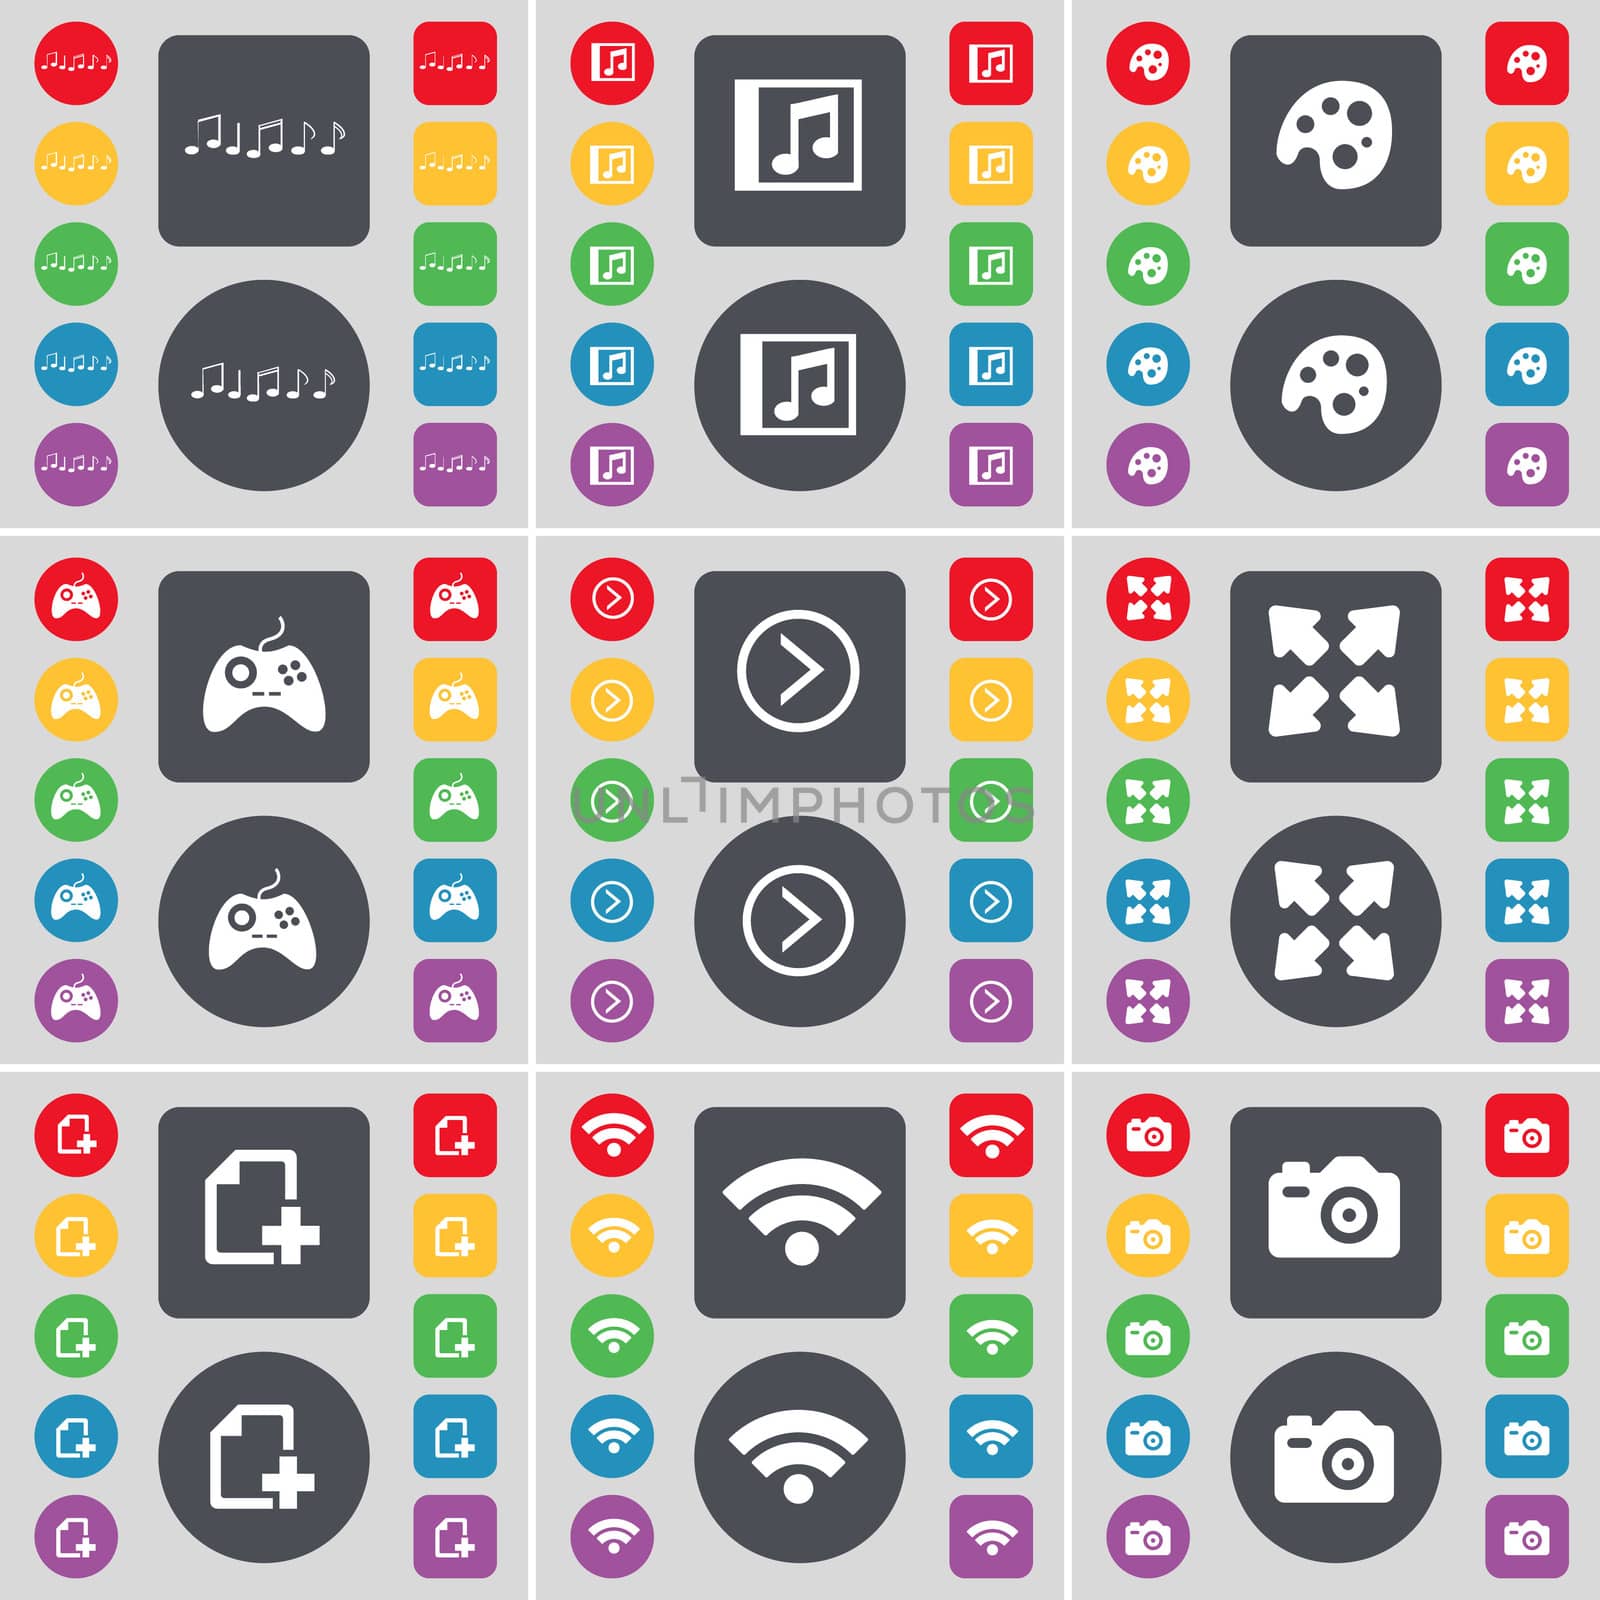 Notes, Music window, Palette, Gamepad, Arrow right, Full screen, File, Wi-Fi, Camera icon symbol. A large set of flat, colored buttons for your design. illustration